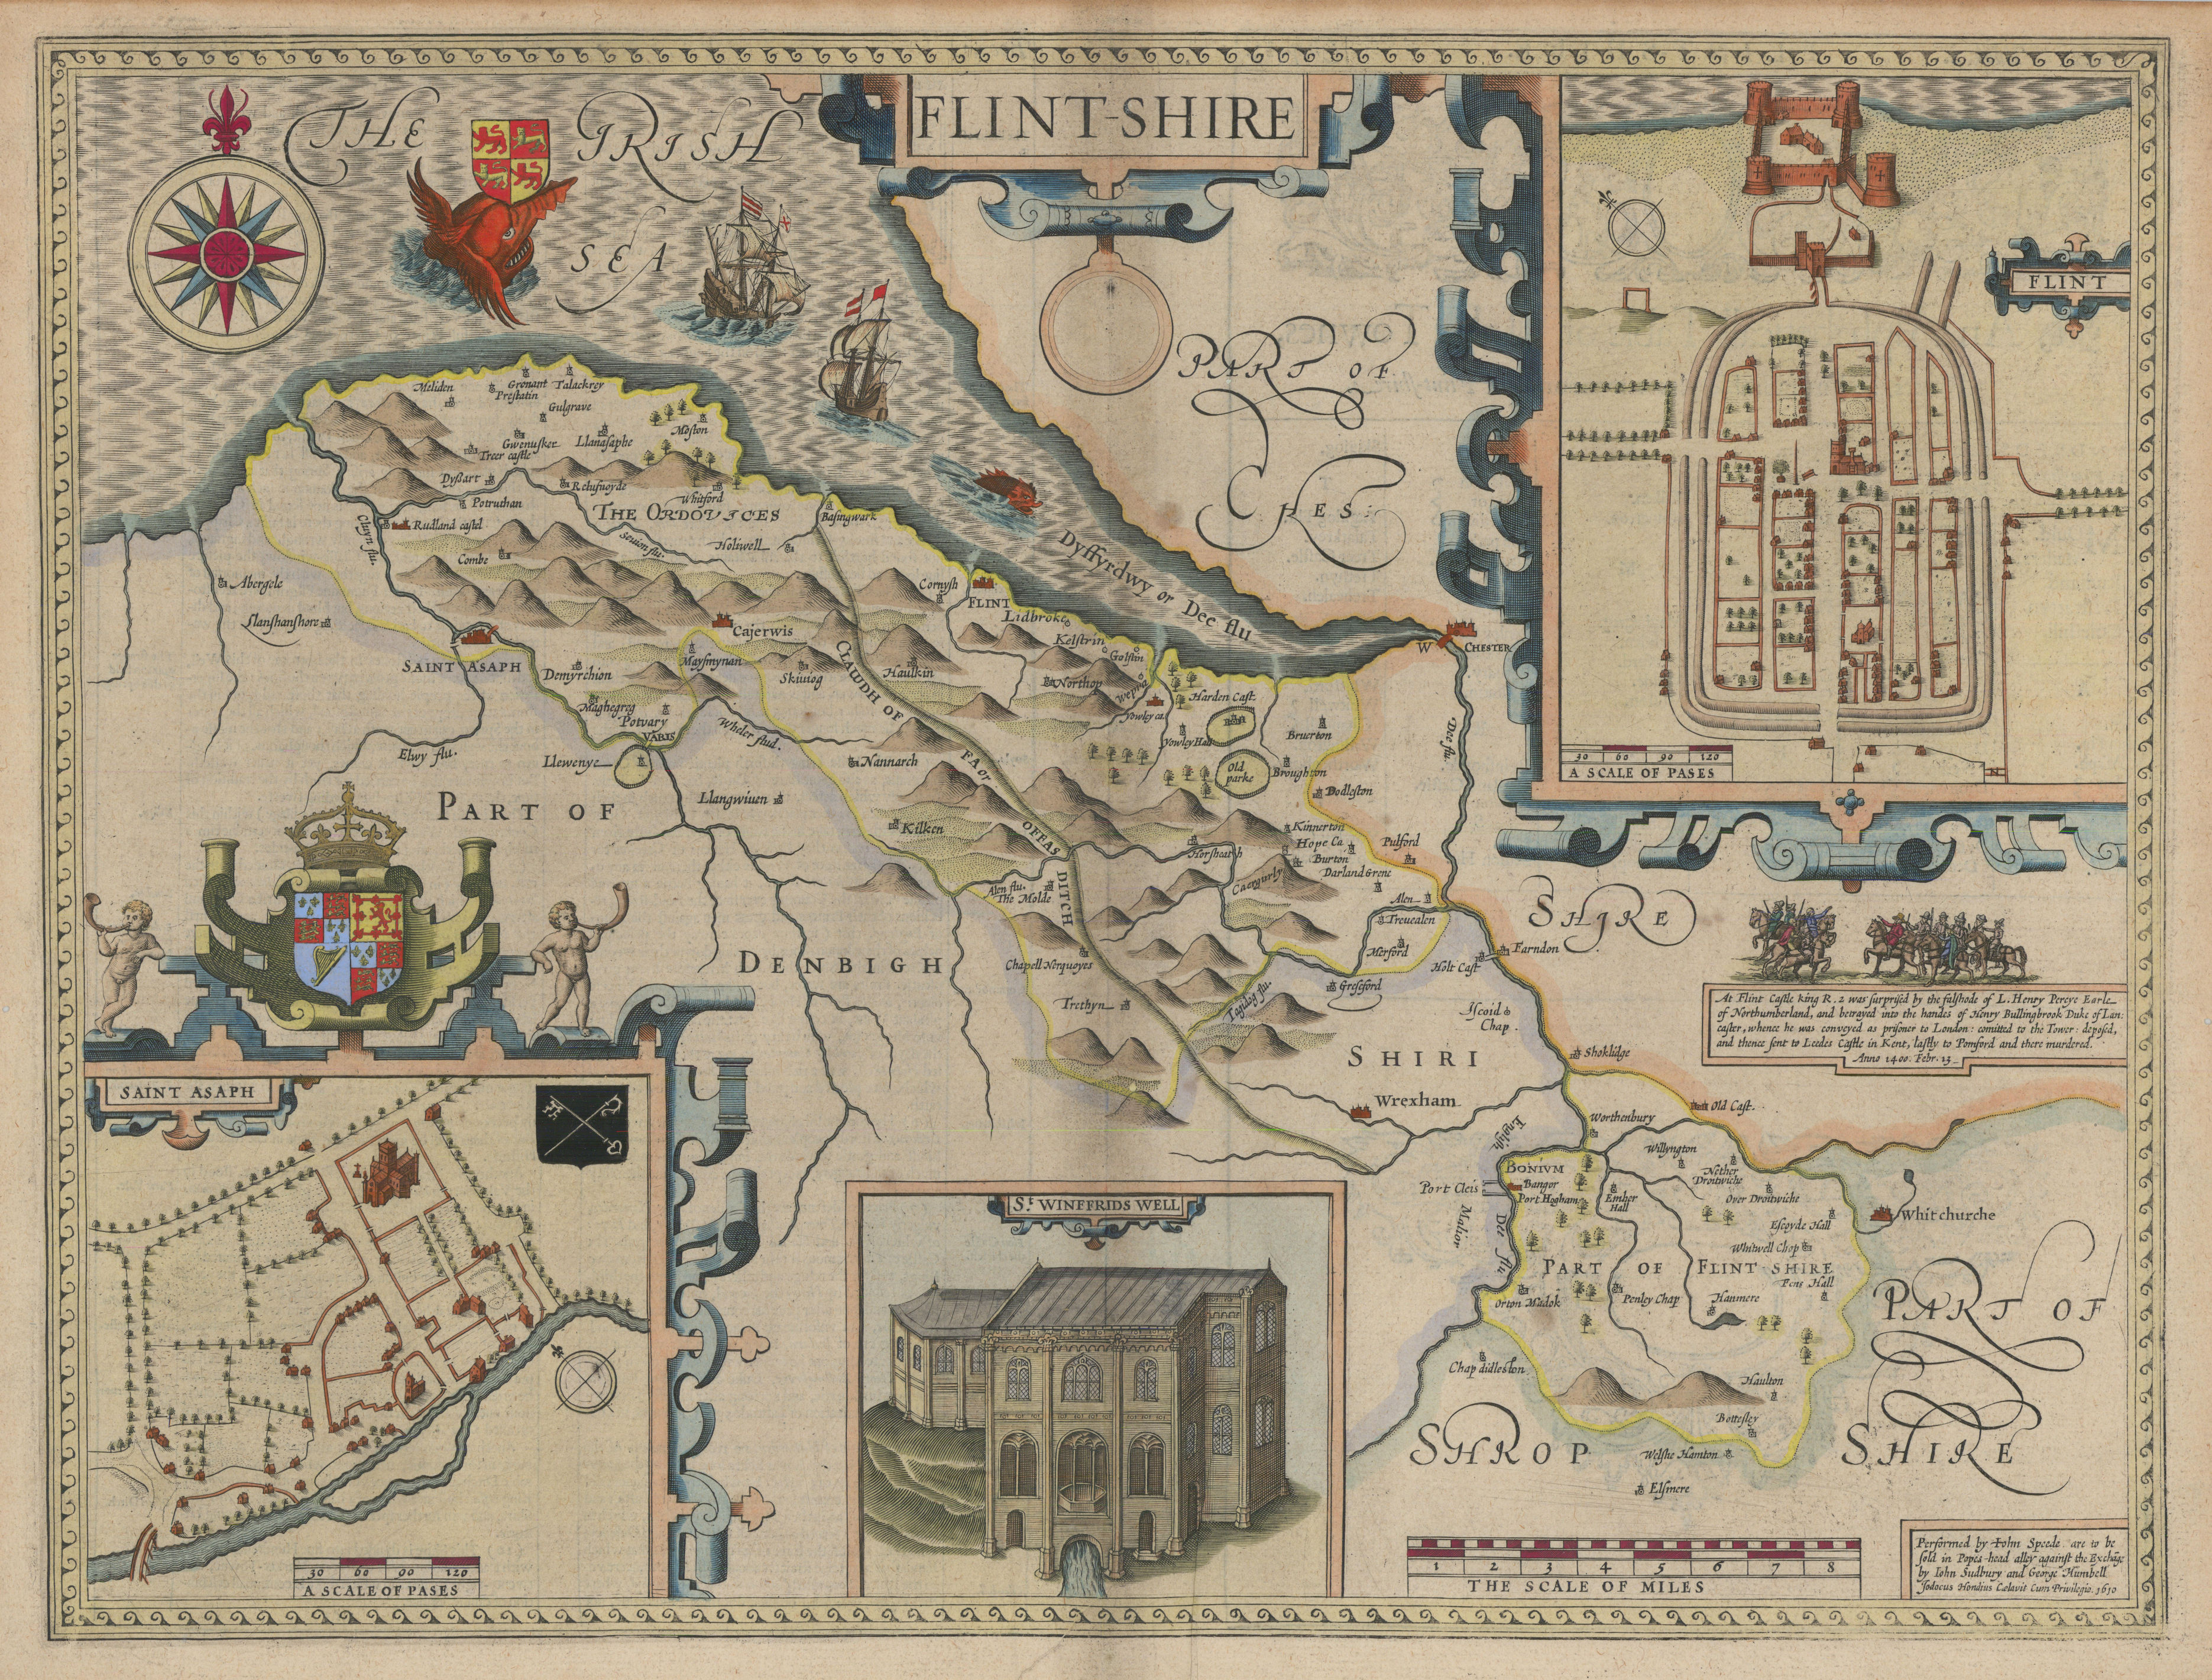 Associate Product Flintshire county map by John Speed. Sudbury & George Humble edition c1627